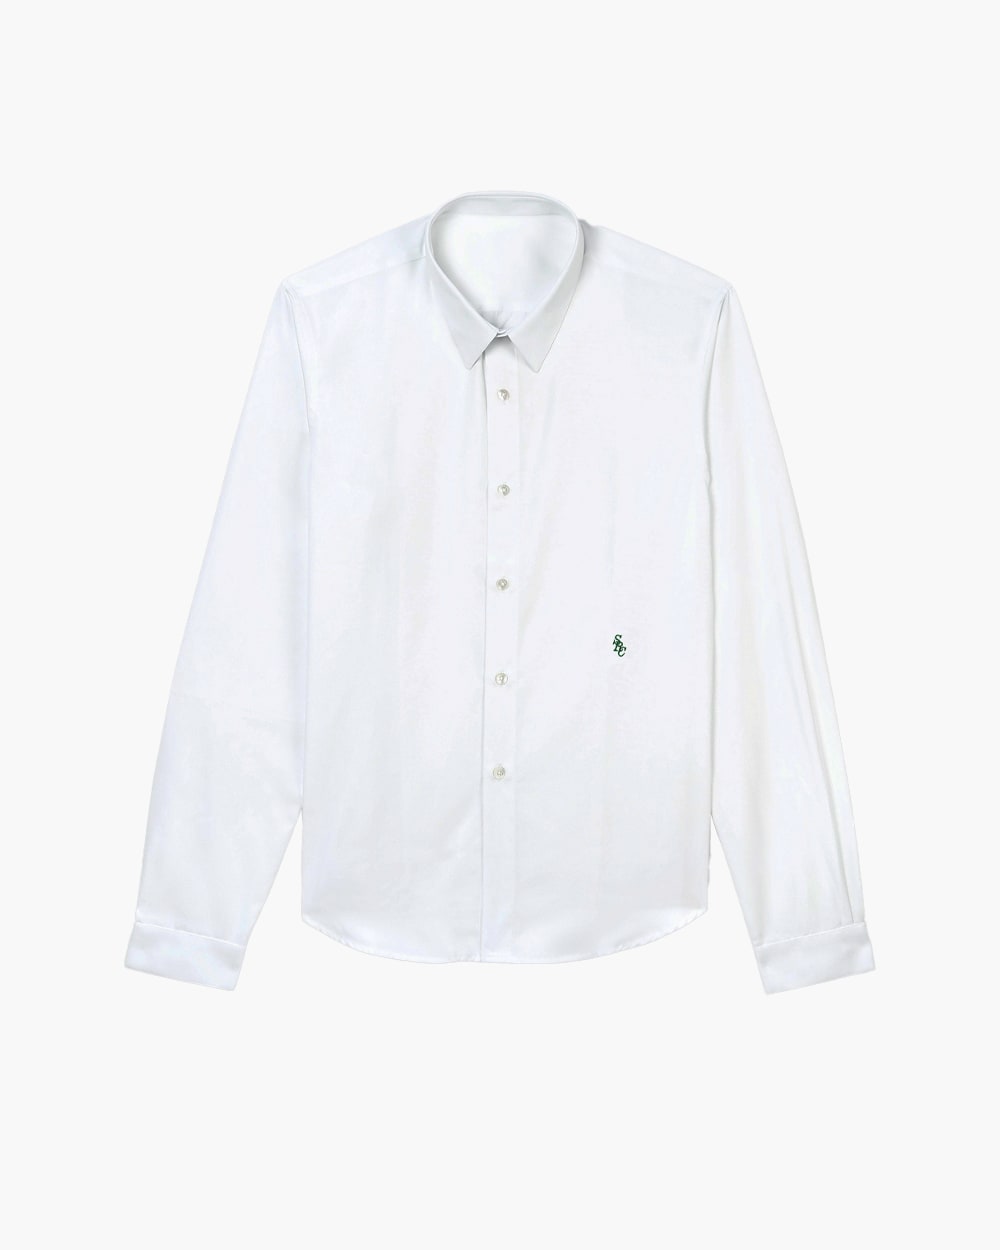 SPORTY AND RICH CHARLIE WHITE SHIRT